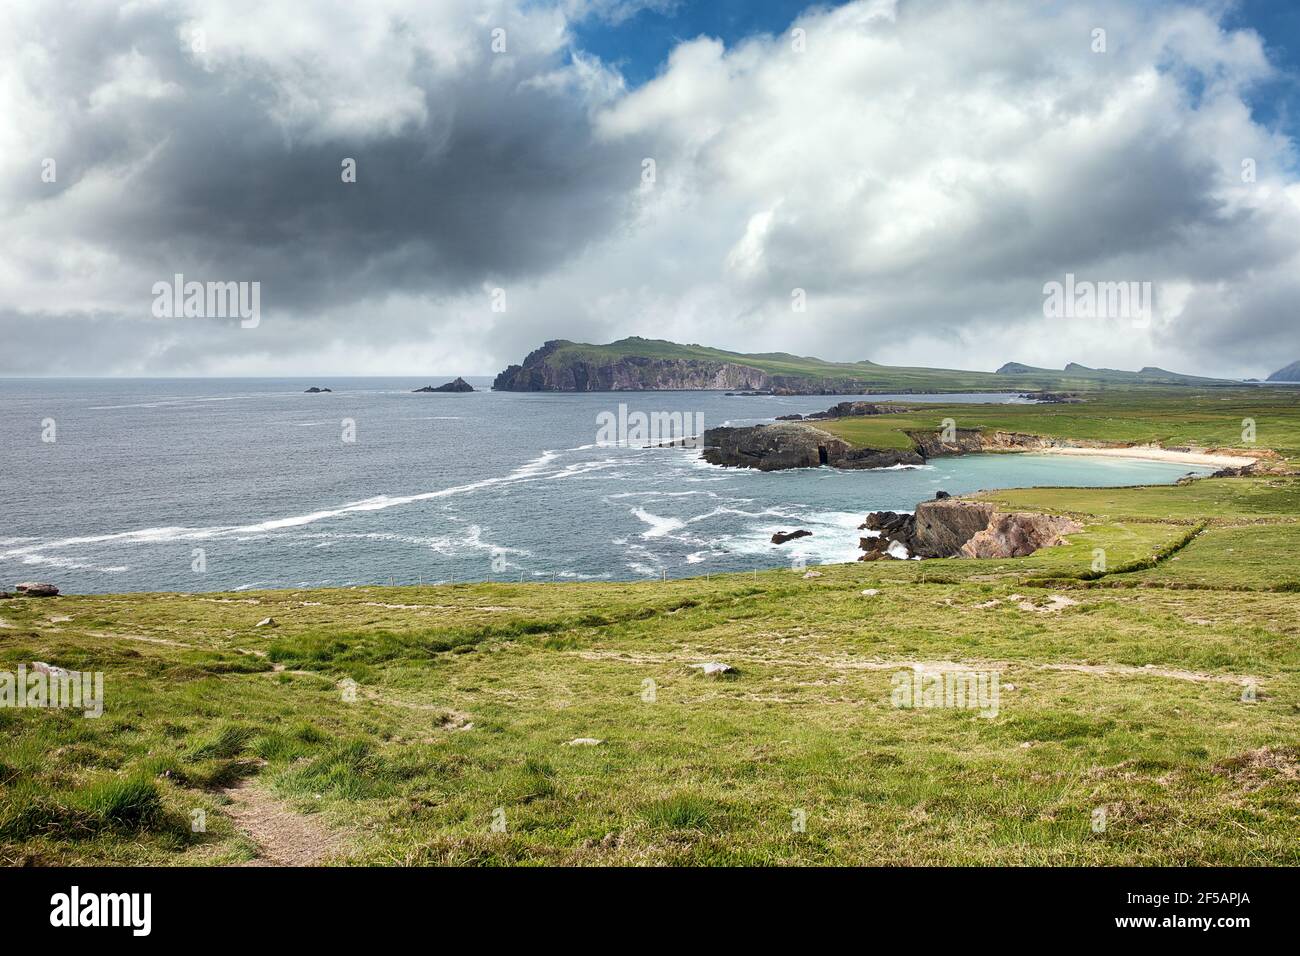 Dingle Peninsula Bay of Ireland with farm pastures and mountains in background Stock Photo